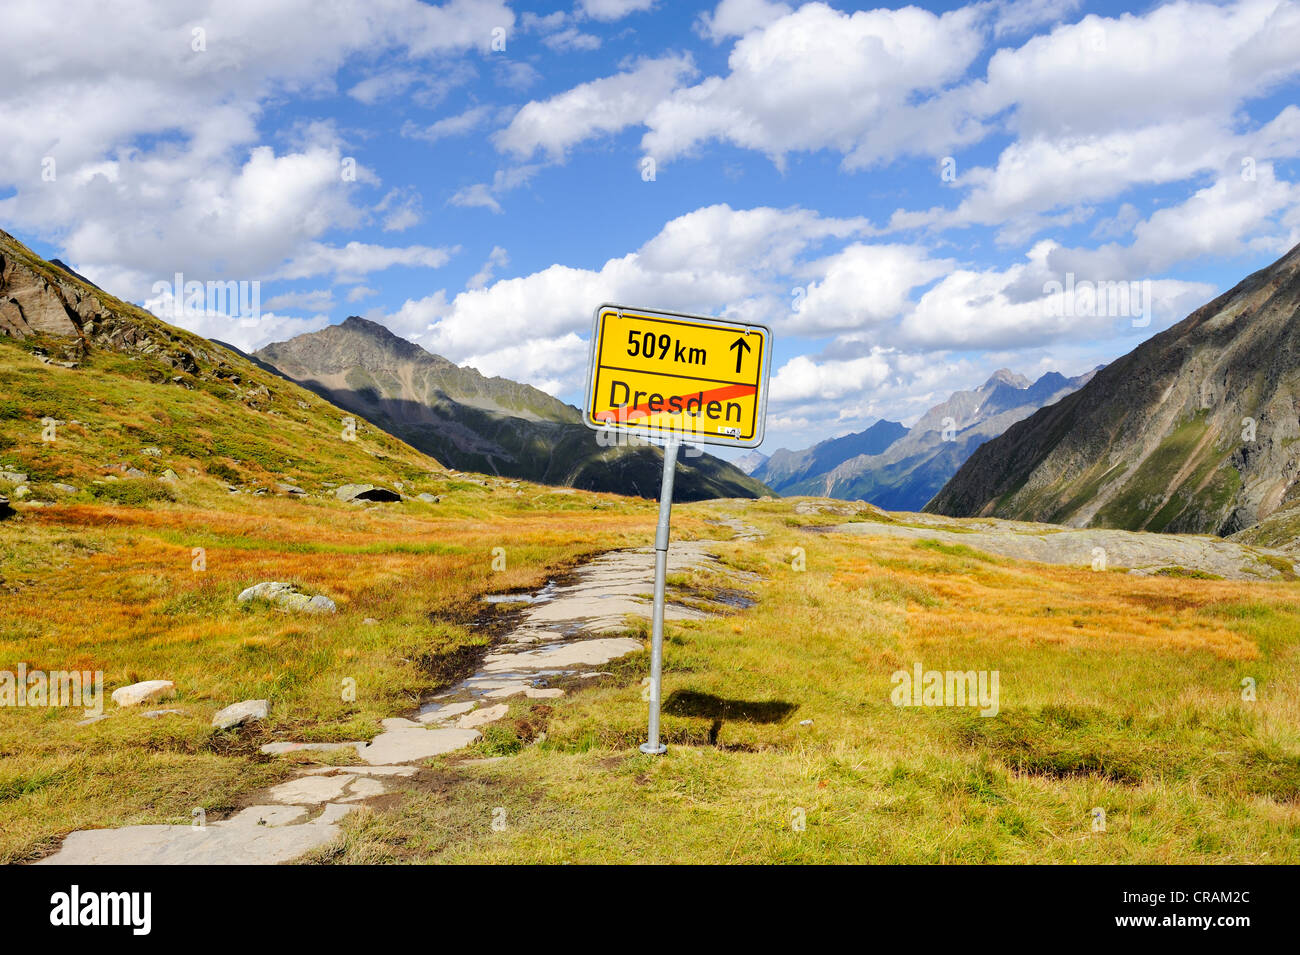 Local sign of the city of Dresden with a distance of 509km, Dresden Hut at Stubai Glacier, Tyrol, Austria, Europe Stock Photo